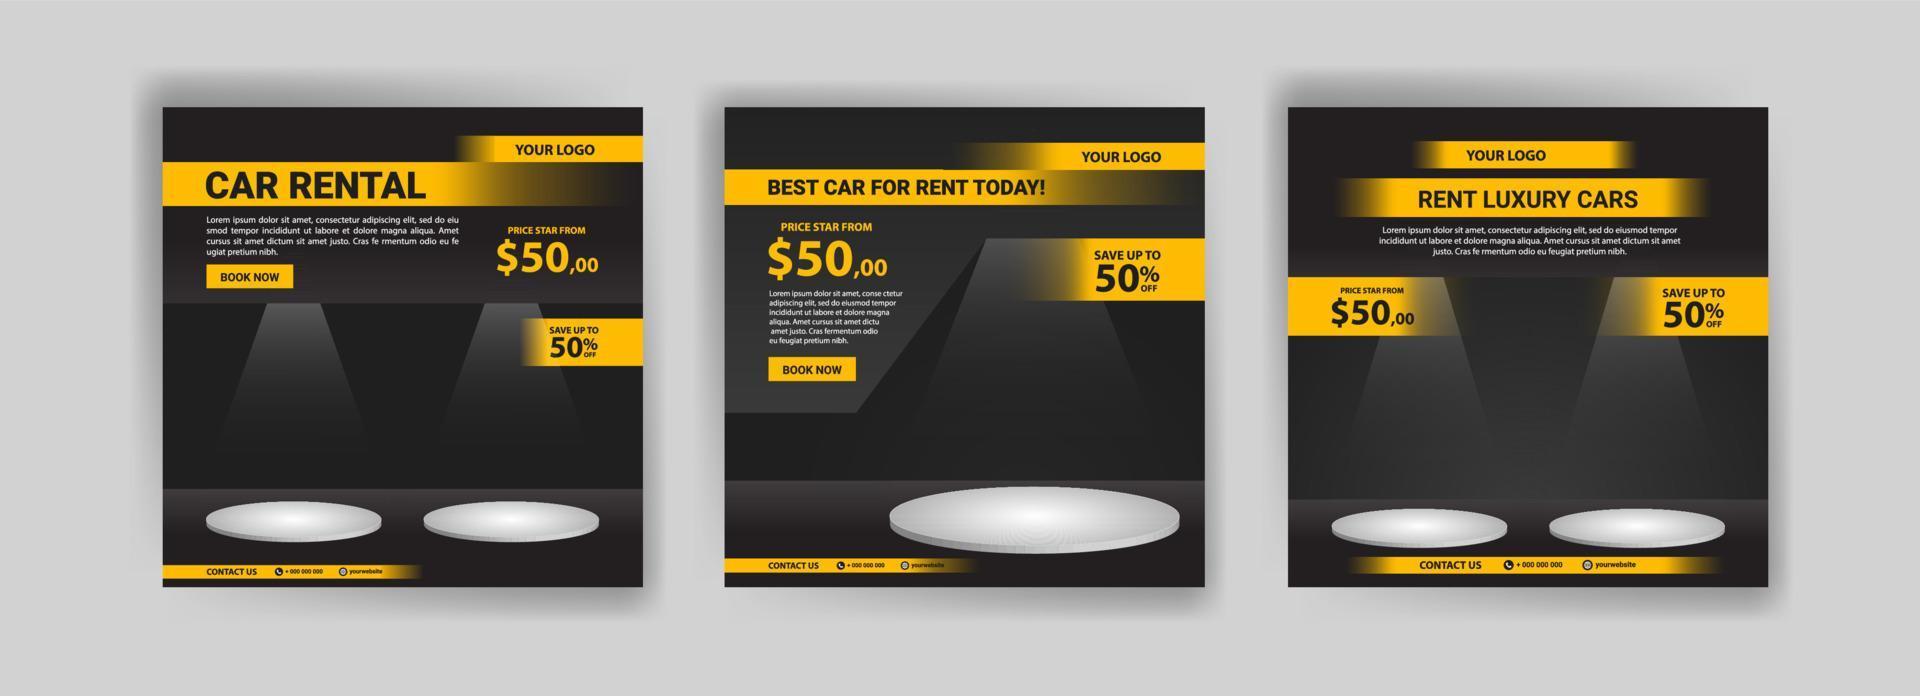 Social media post template for automotive car rental service. Banner vector for social media ads, web ads, business messages, discount flyers and big sale banners.